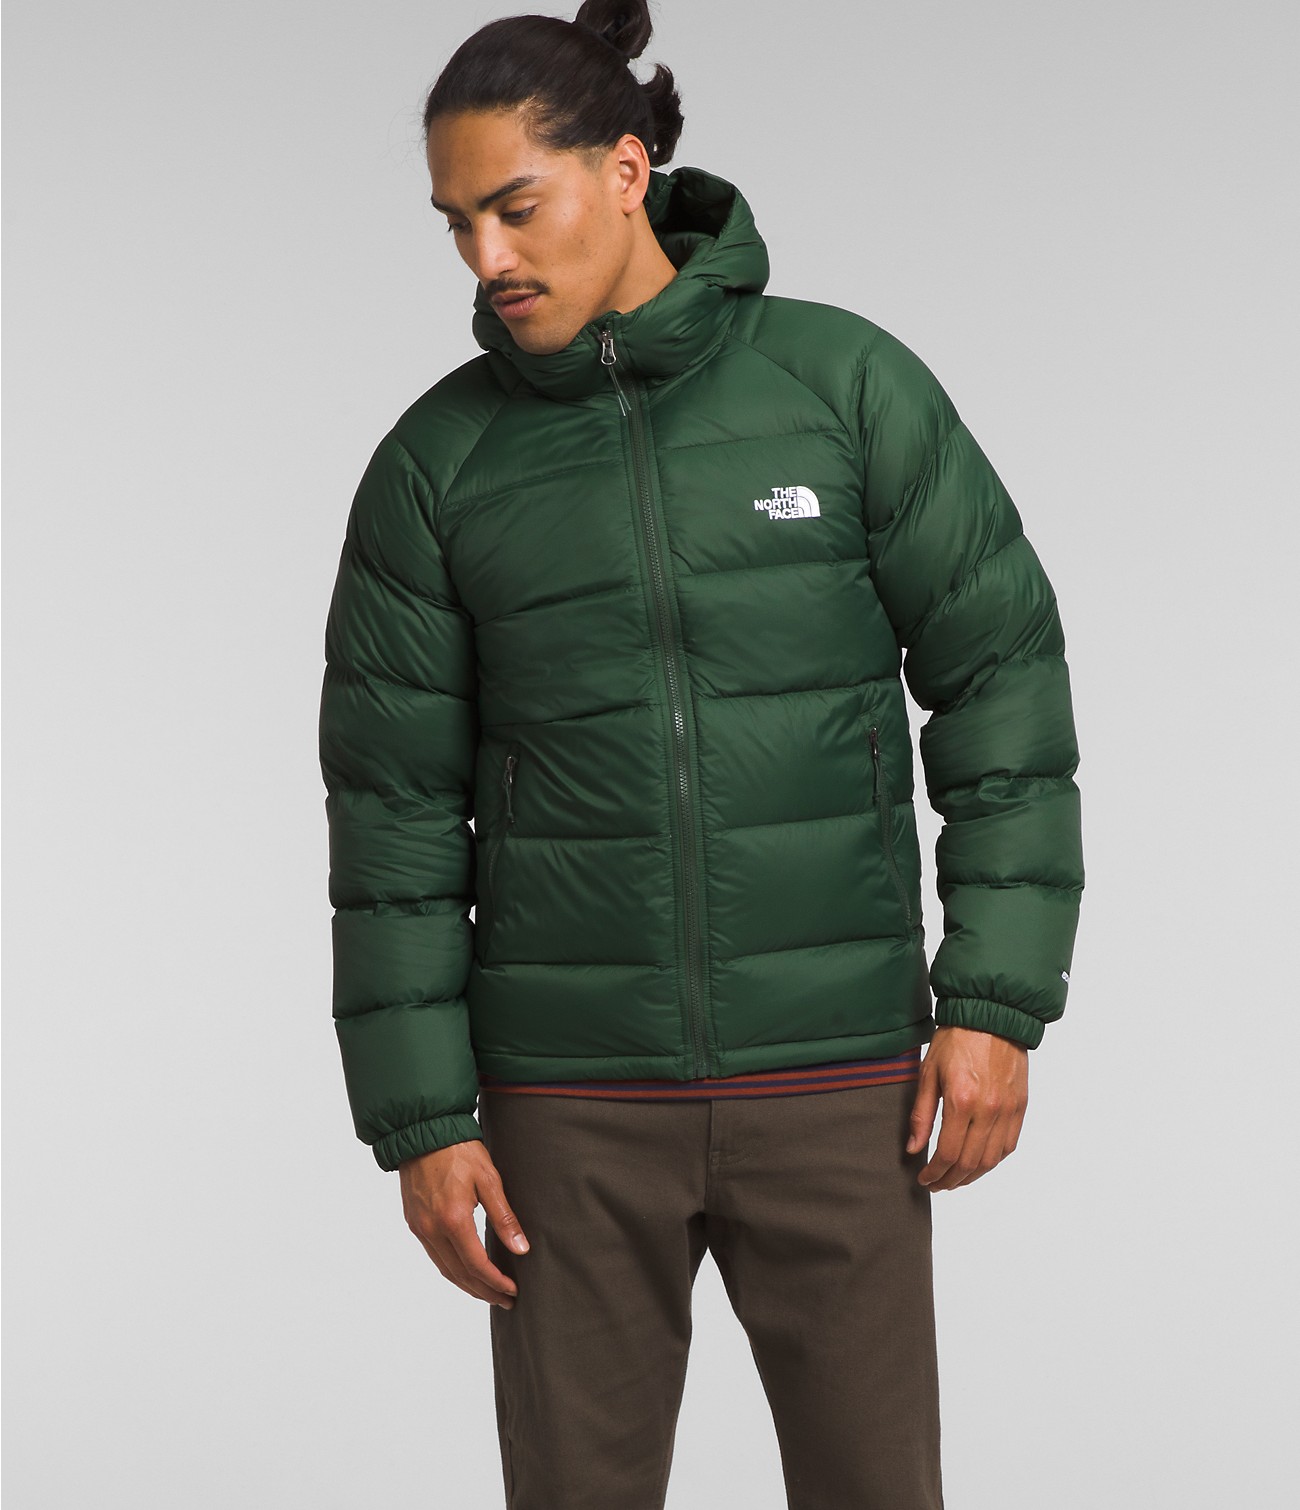 Unlock Wilderness' choice in the Wantdo Vs North Face comparison, the Hydrenalite™ Down Hoodie by The North Face